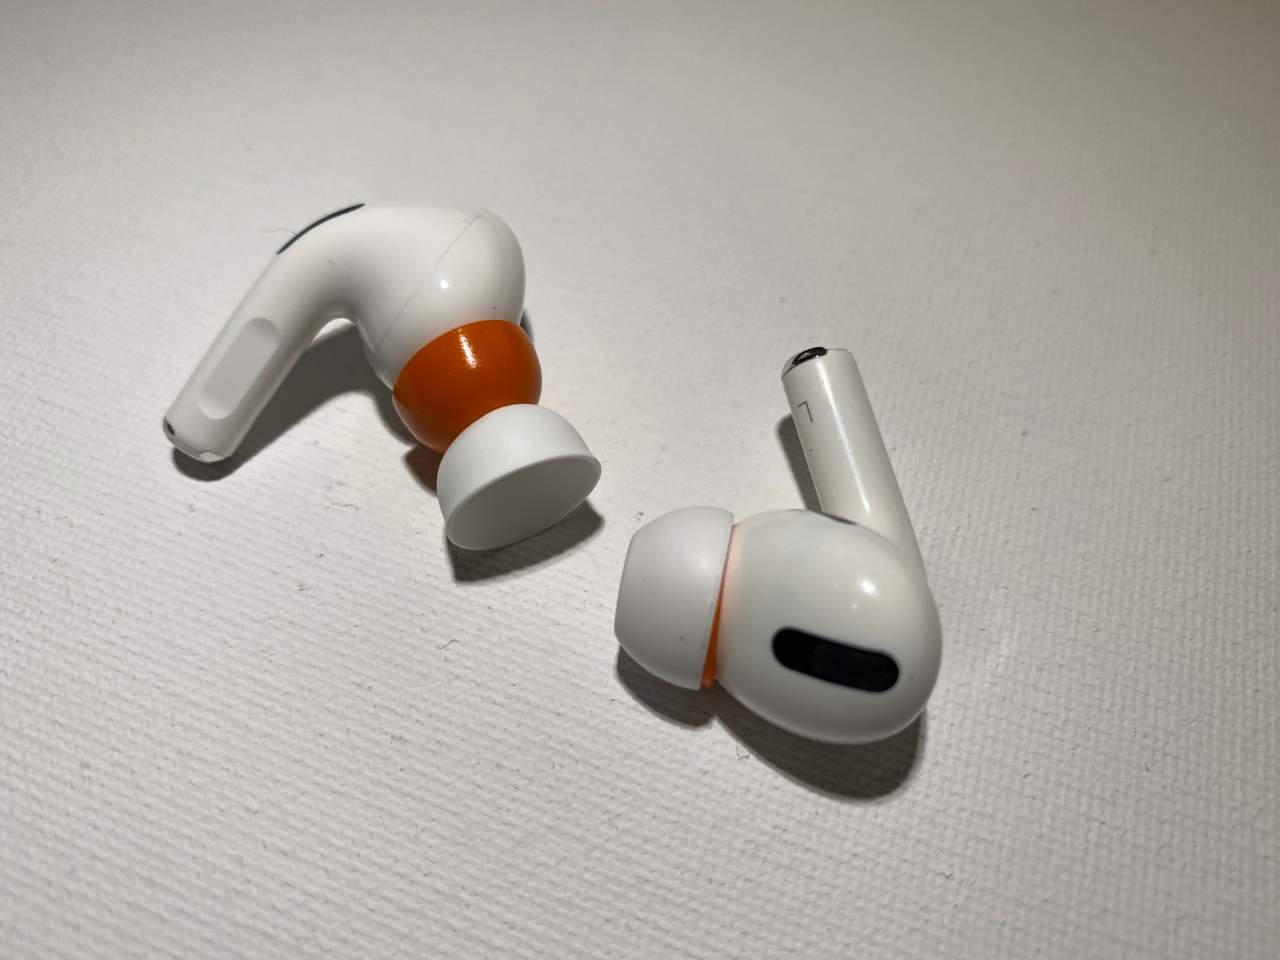 væv Amazon Jungle øge AirPod Pros Keep Falling Out? Here's What You Can Do - AppleToolBox